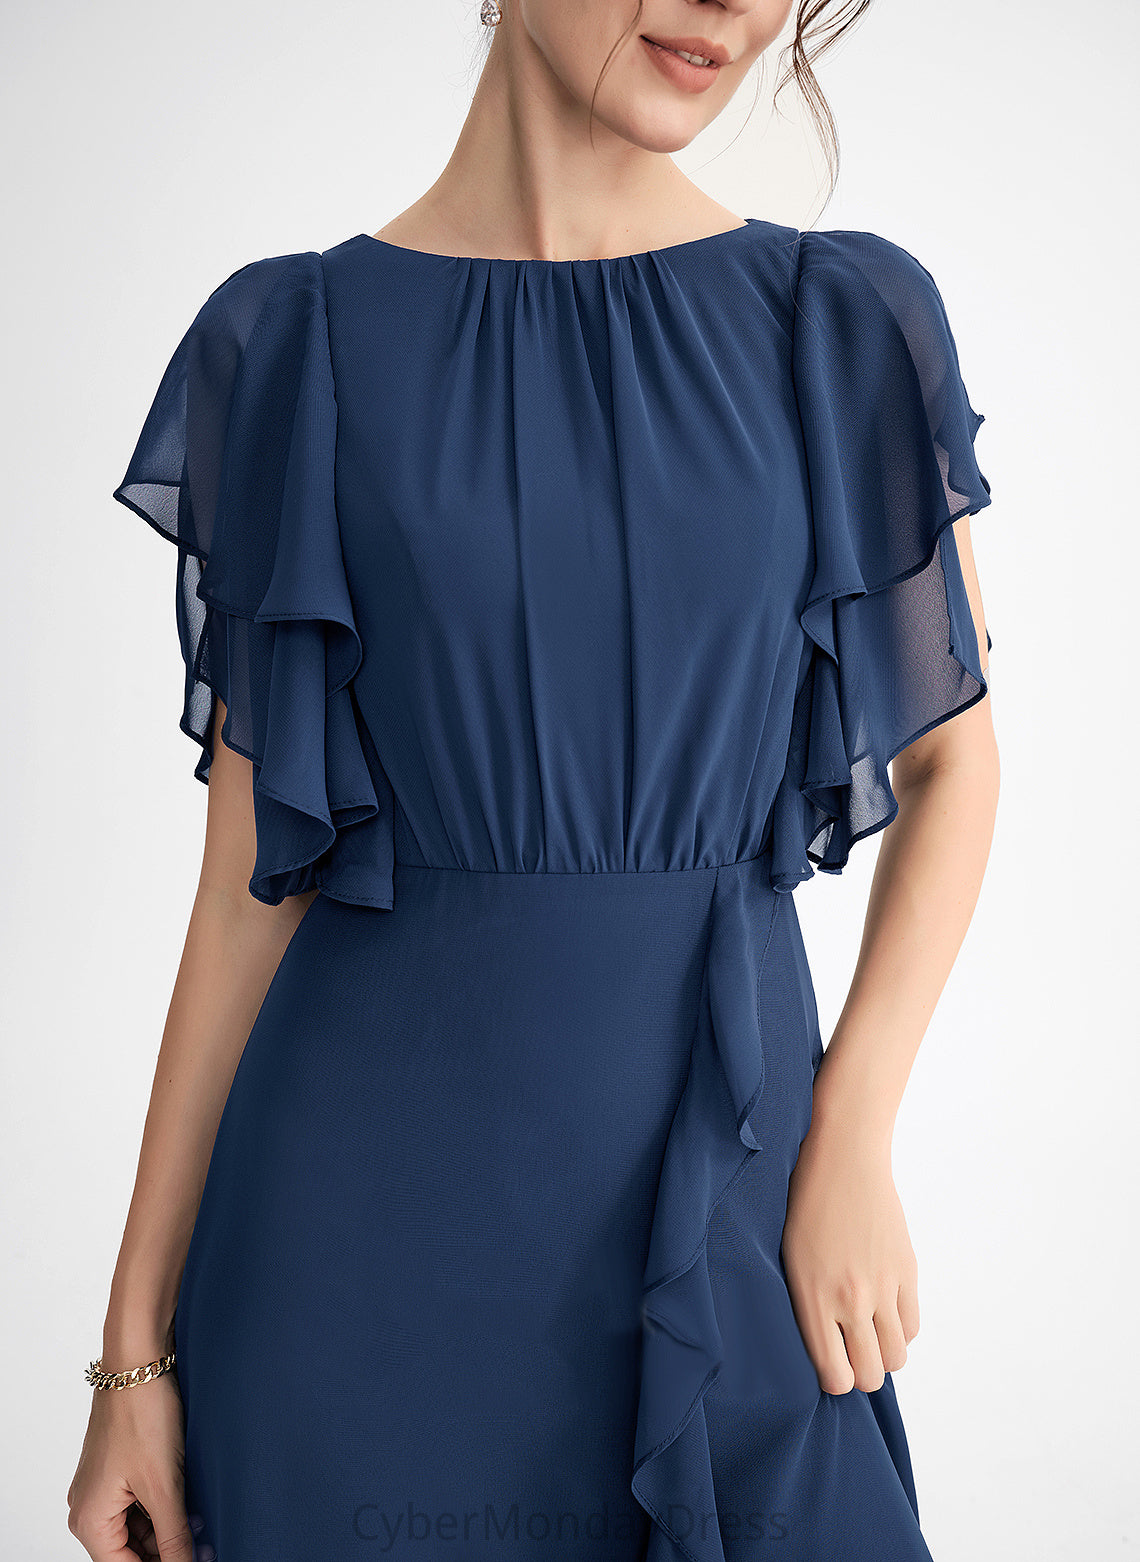 A-Line Ruffles Cocktail With Chiffon Cascading Angela Neck Scoop Dress Cocktail Dresses Asymmetrical